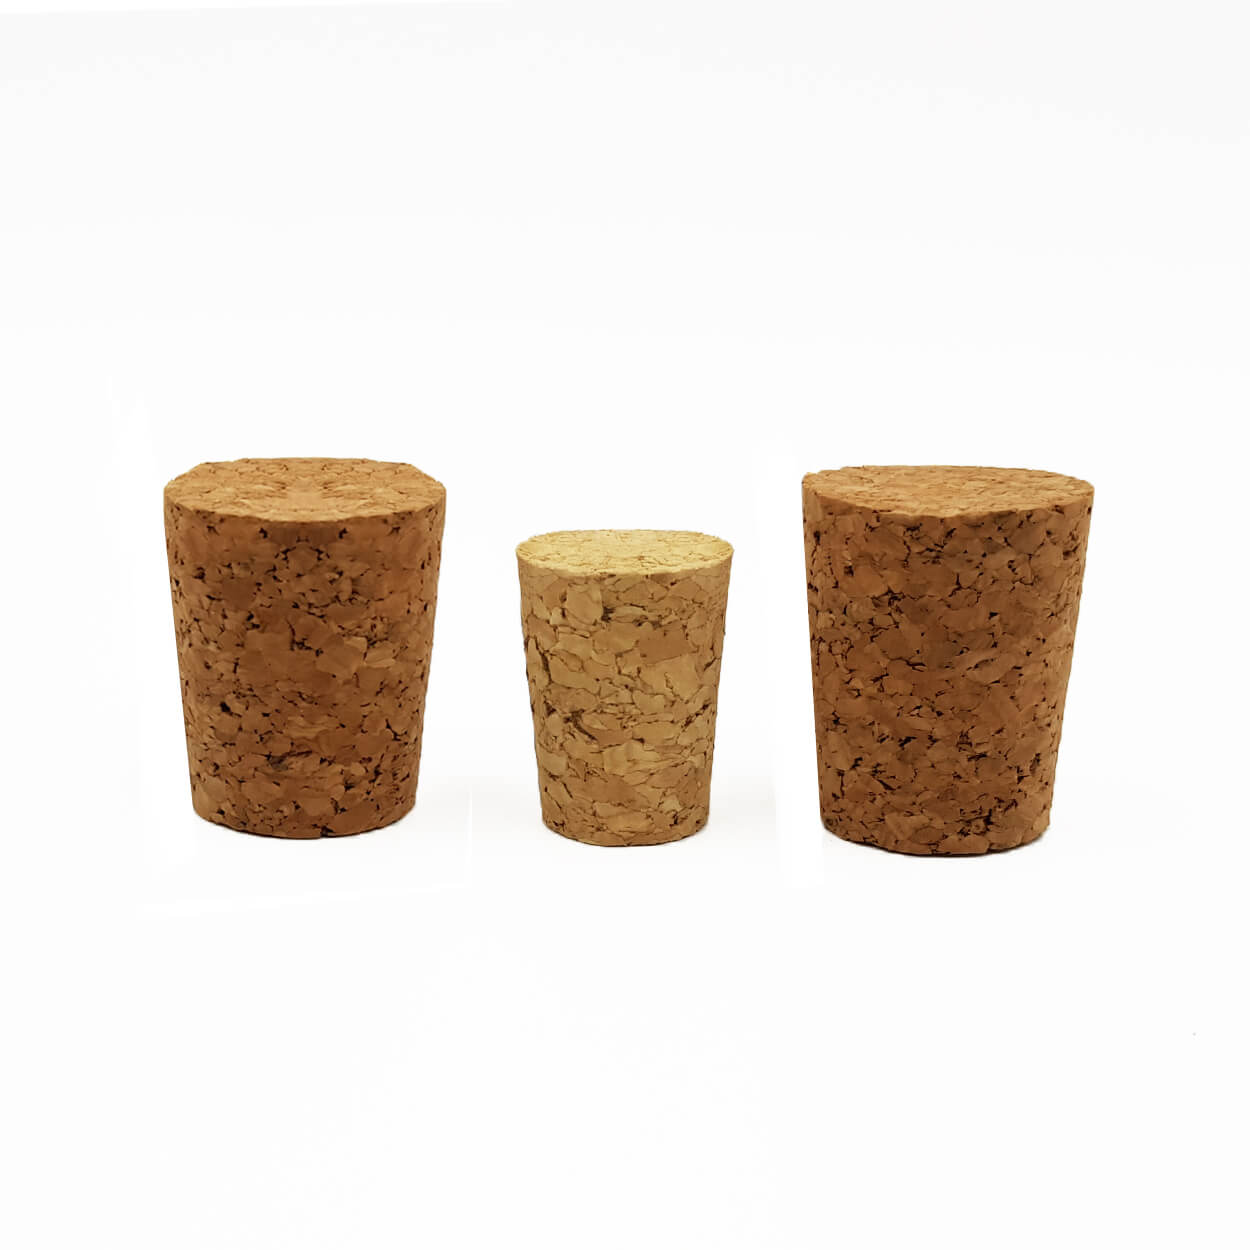 made in Portugal SALE 3 14 inch tapered corks